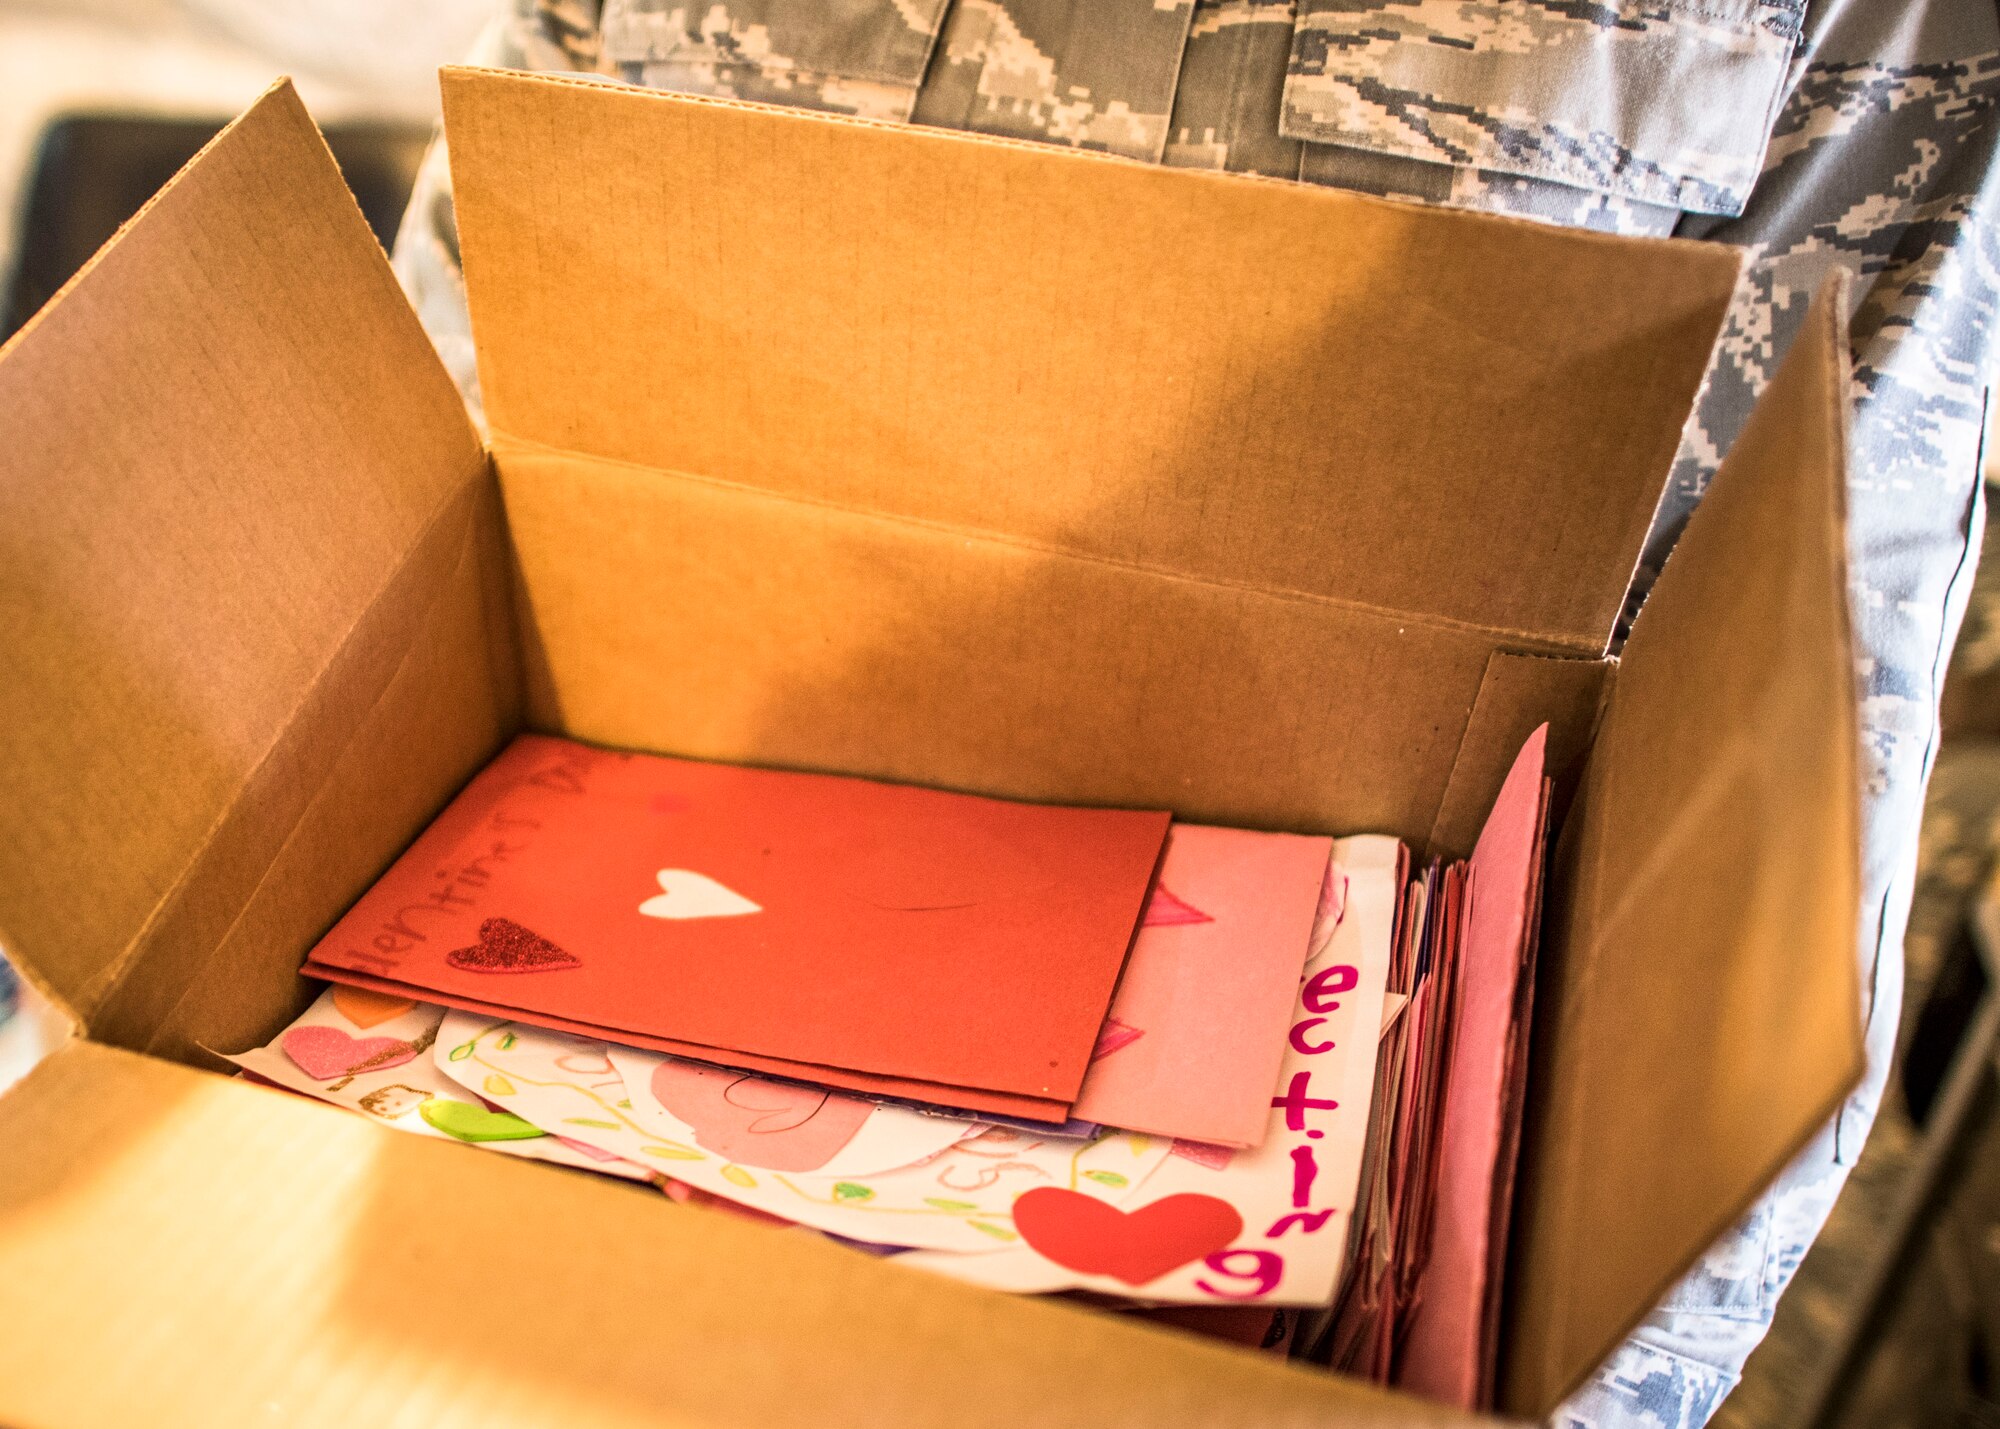 An Airman holds a box of Valentine’s Day cards, Feb. 14, 2017, in Southwest Asia. Students from Cape Cod, Massachusetts handcrafted cards for service members serving overseas. (U.S. Air Force photo by Staff Sgt. Eboni Reams)